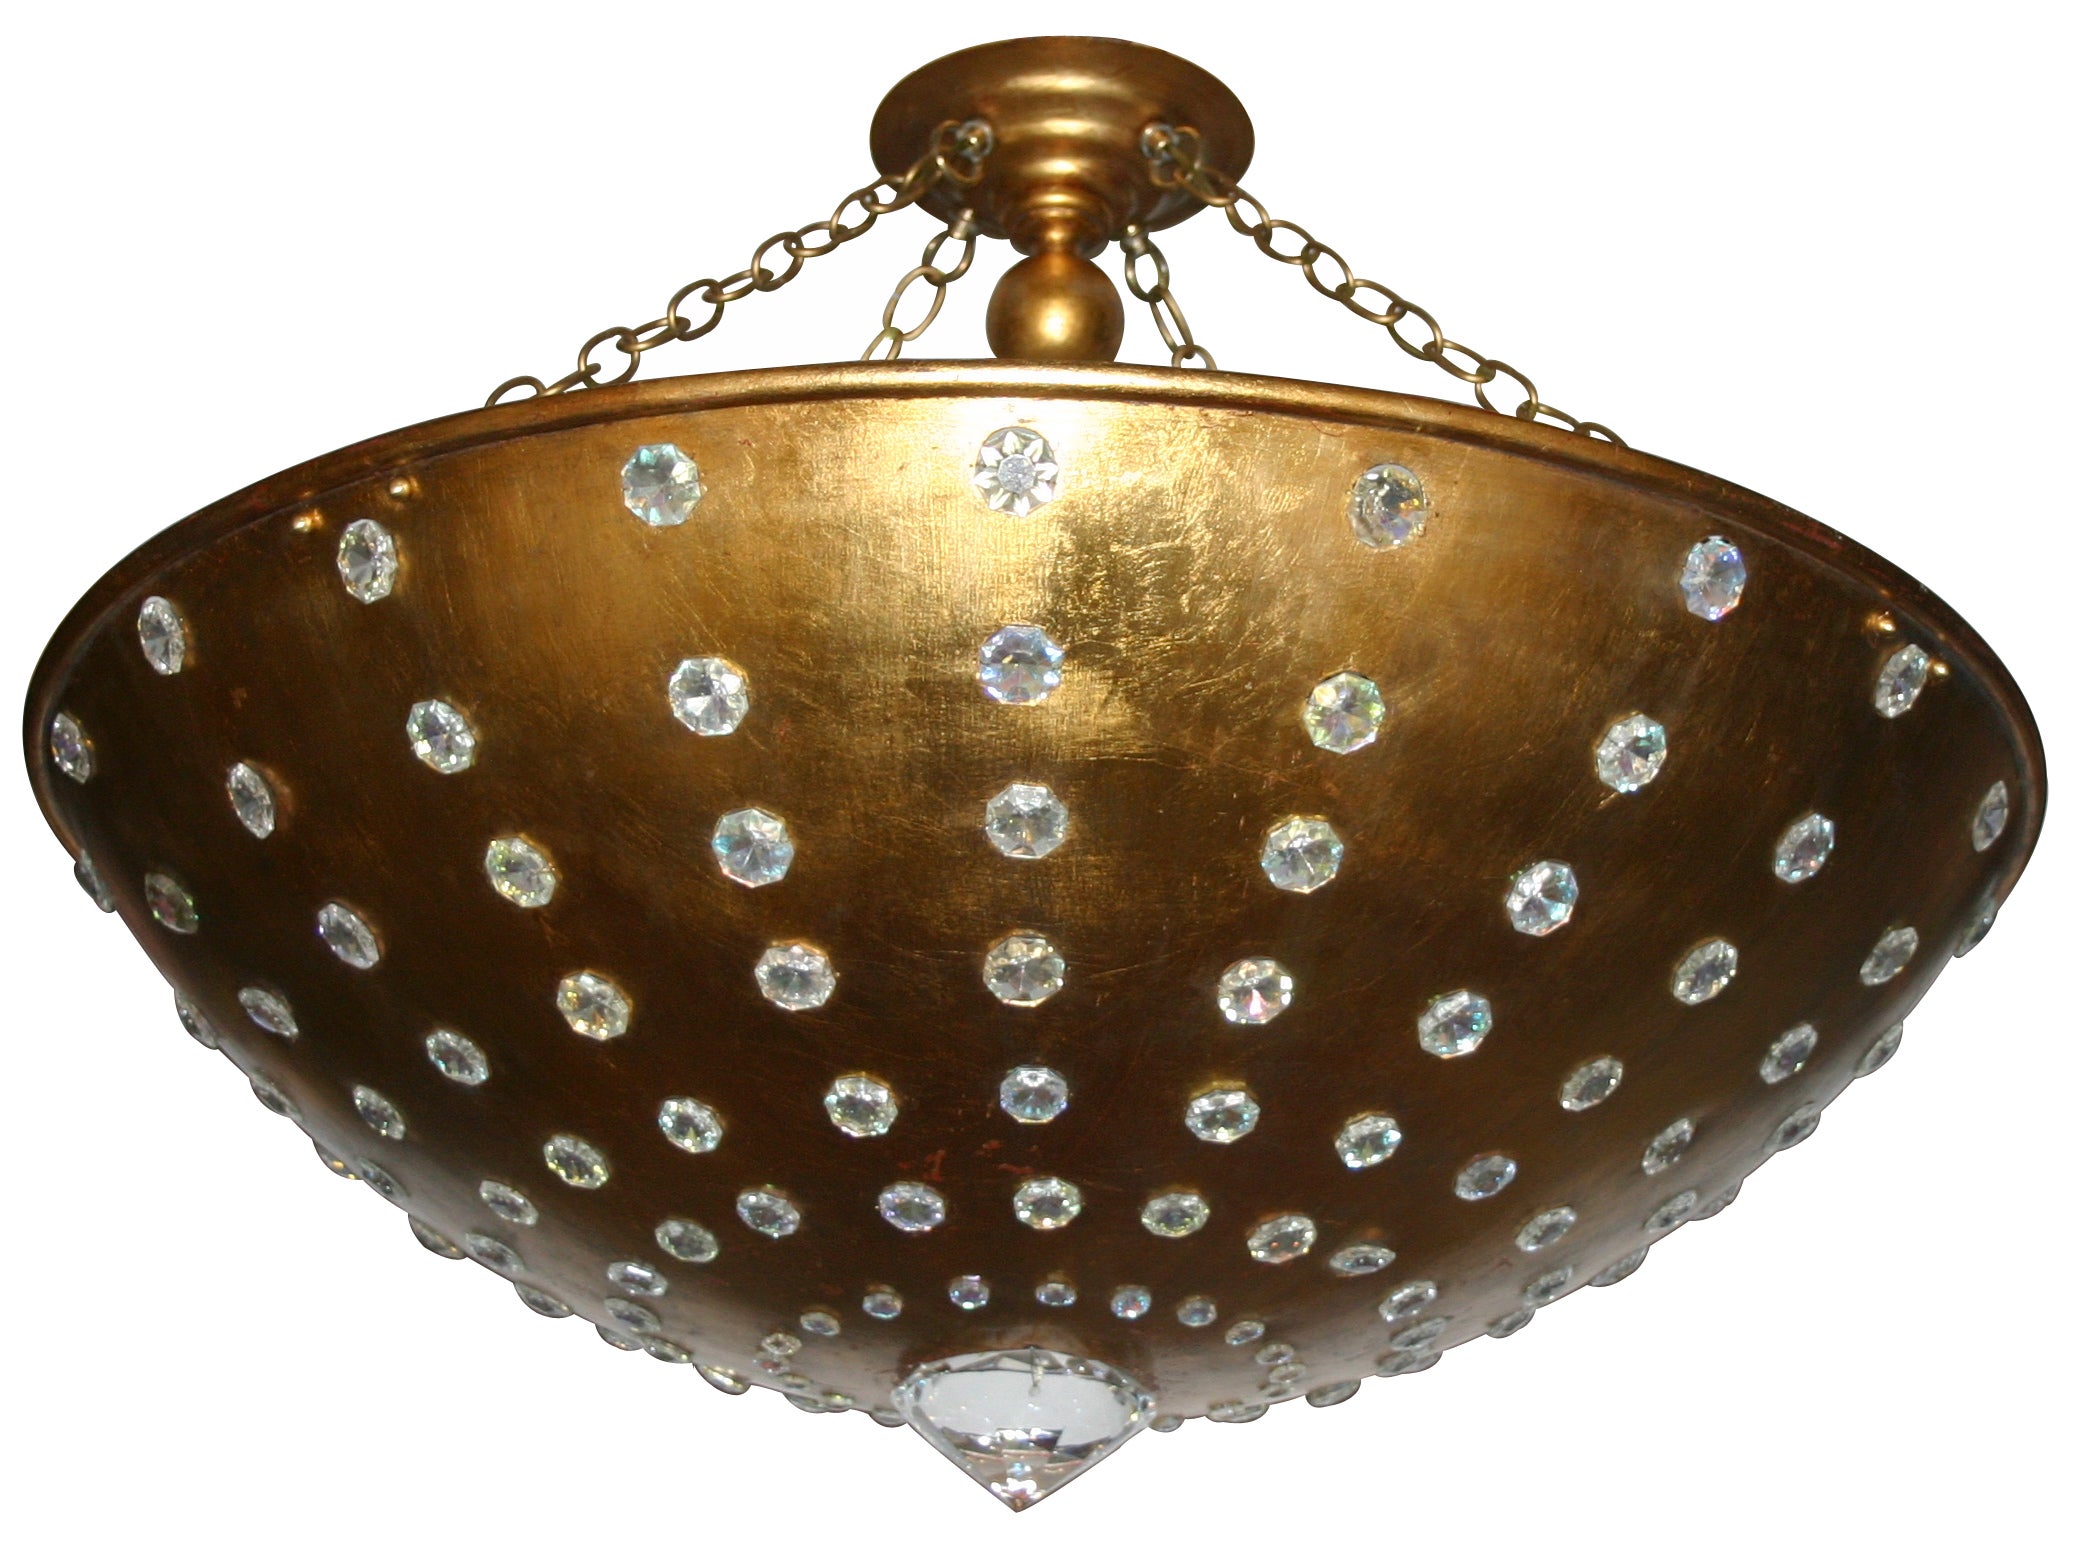 Pair of Gilt Metal Light Fixtures with Crystals